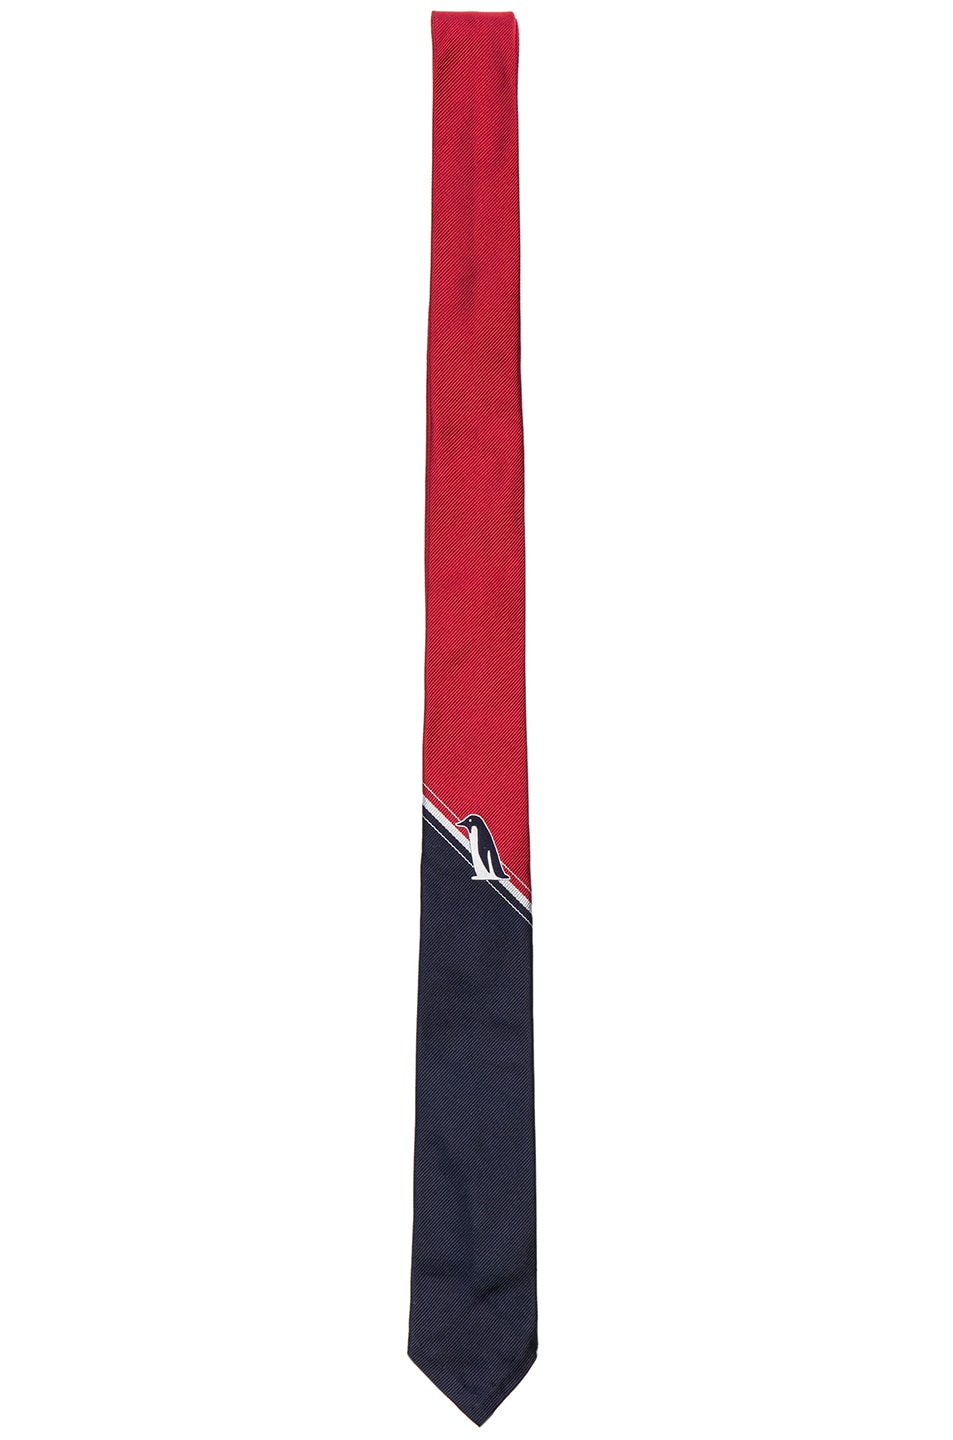 Image 1 of Thom Browne Classic Penguin Engineered Stripe Tie in Red, White & Blue